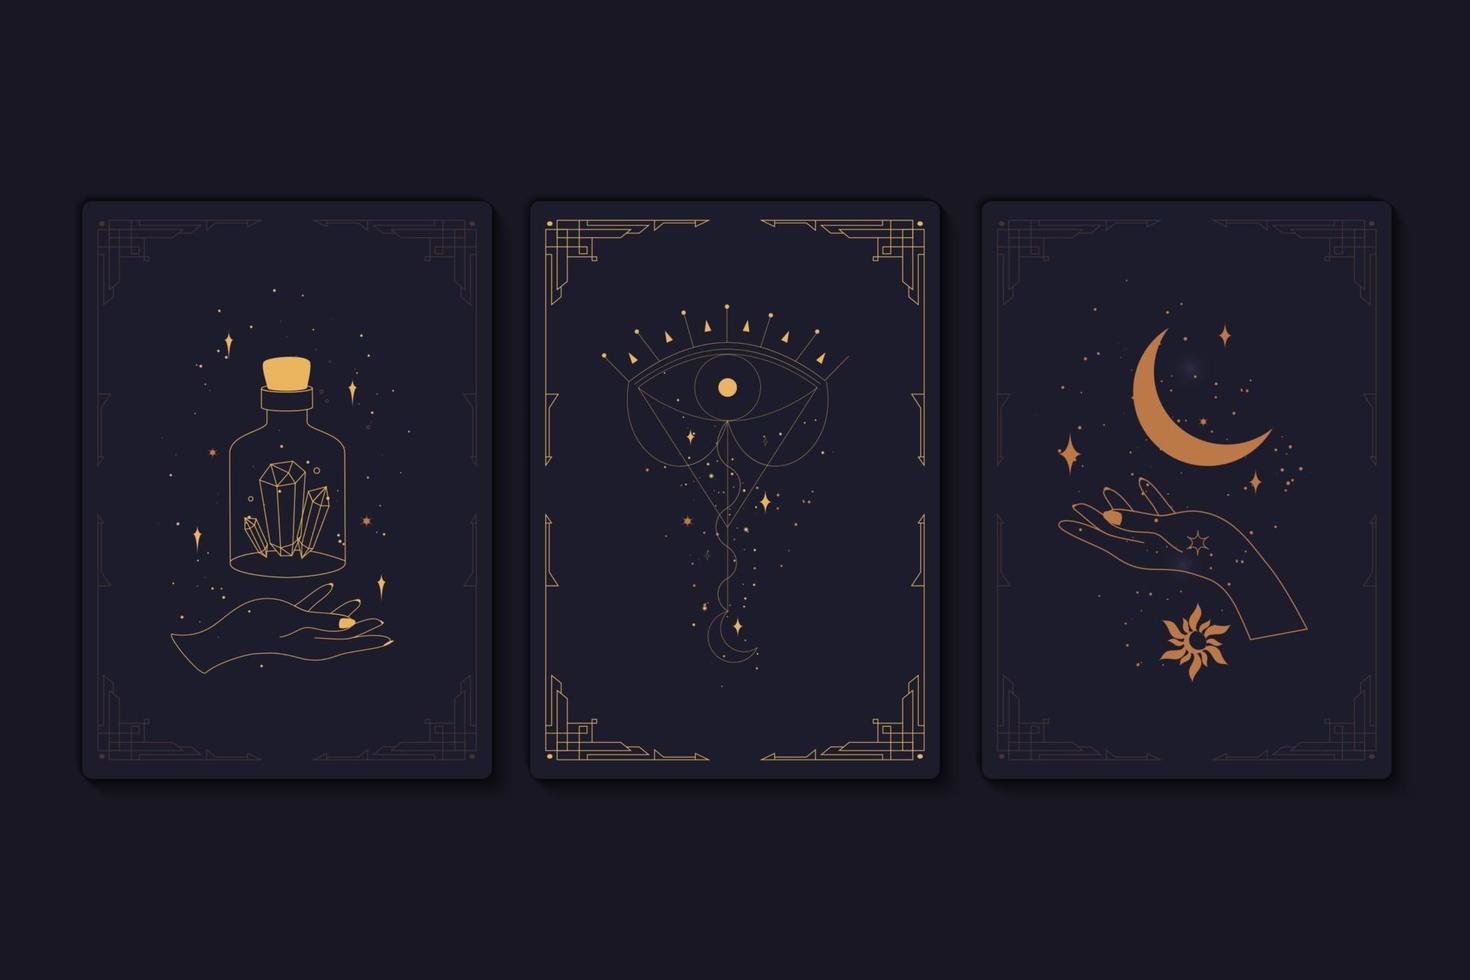 Set of mystical tarot cards. Elements of esoteric, occult, alchemical and witch symbols. Zodiac signs. Cards with esoteric symbols. Silhouette of hands, stars, moon and crystals. Vector illustration